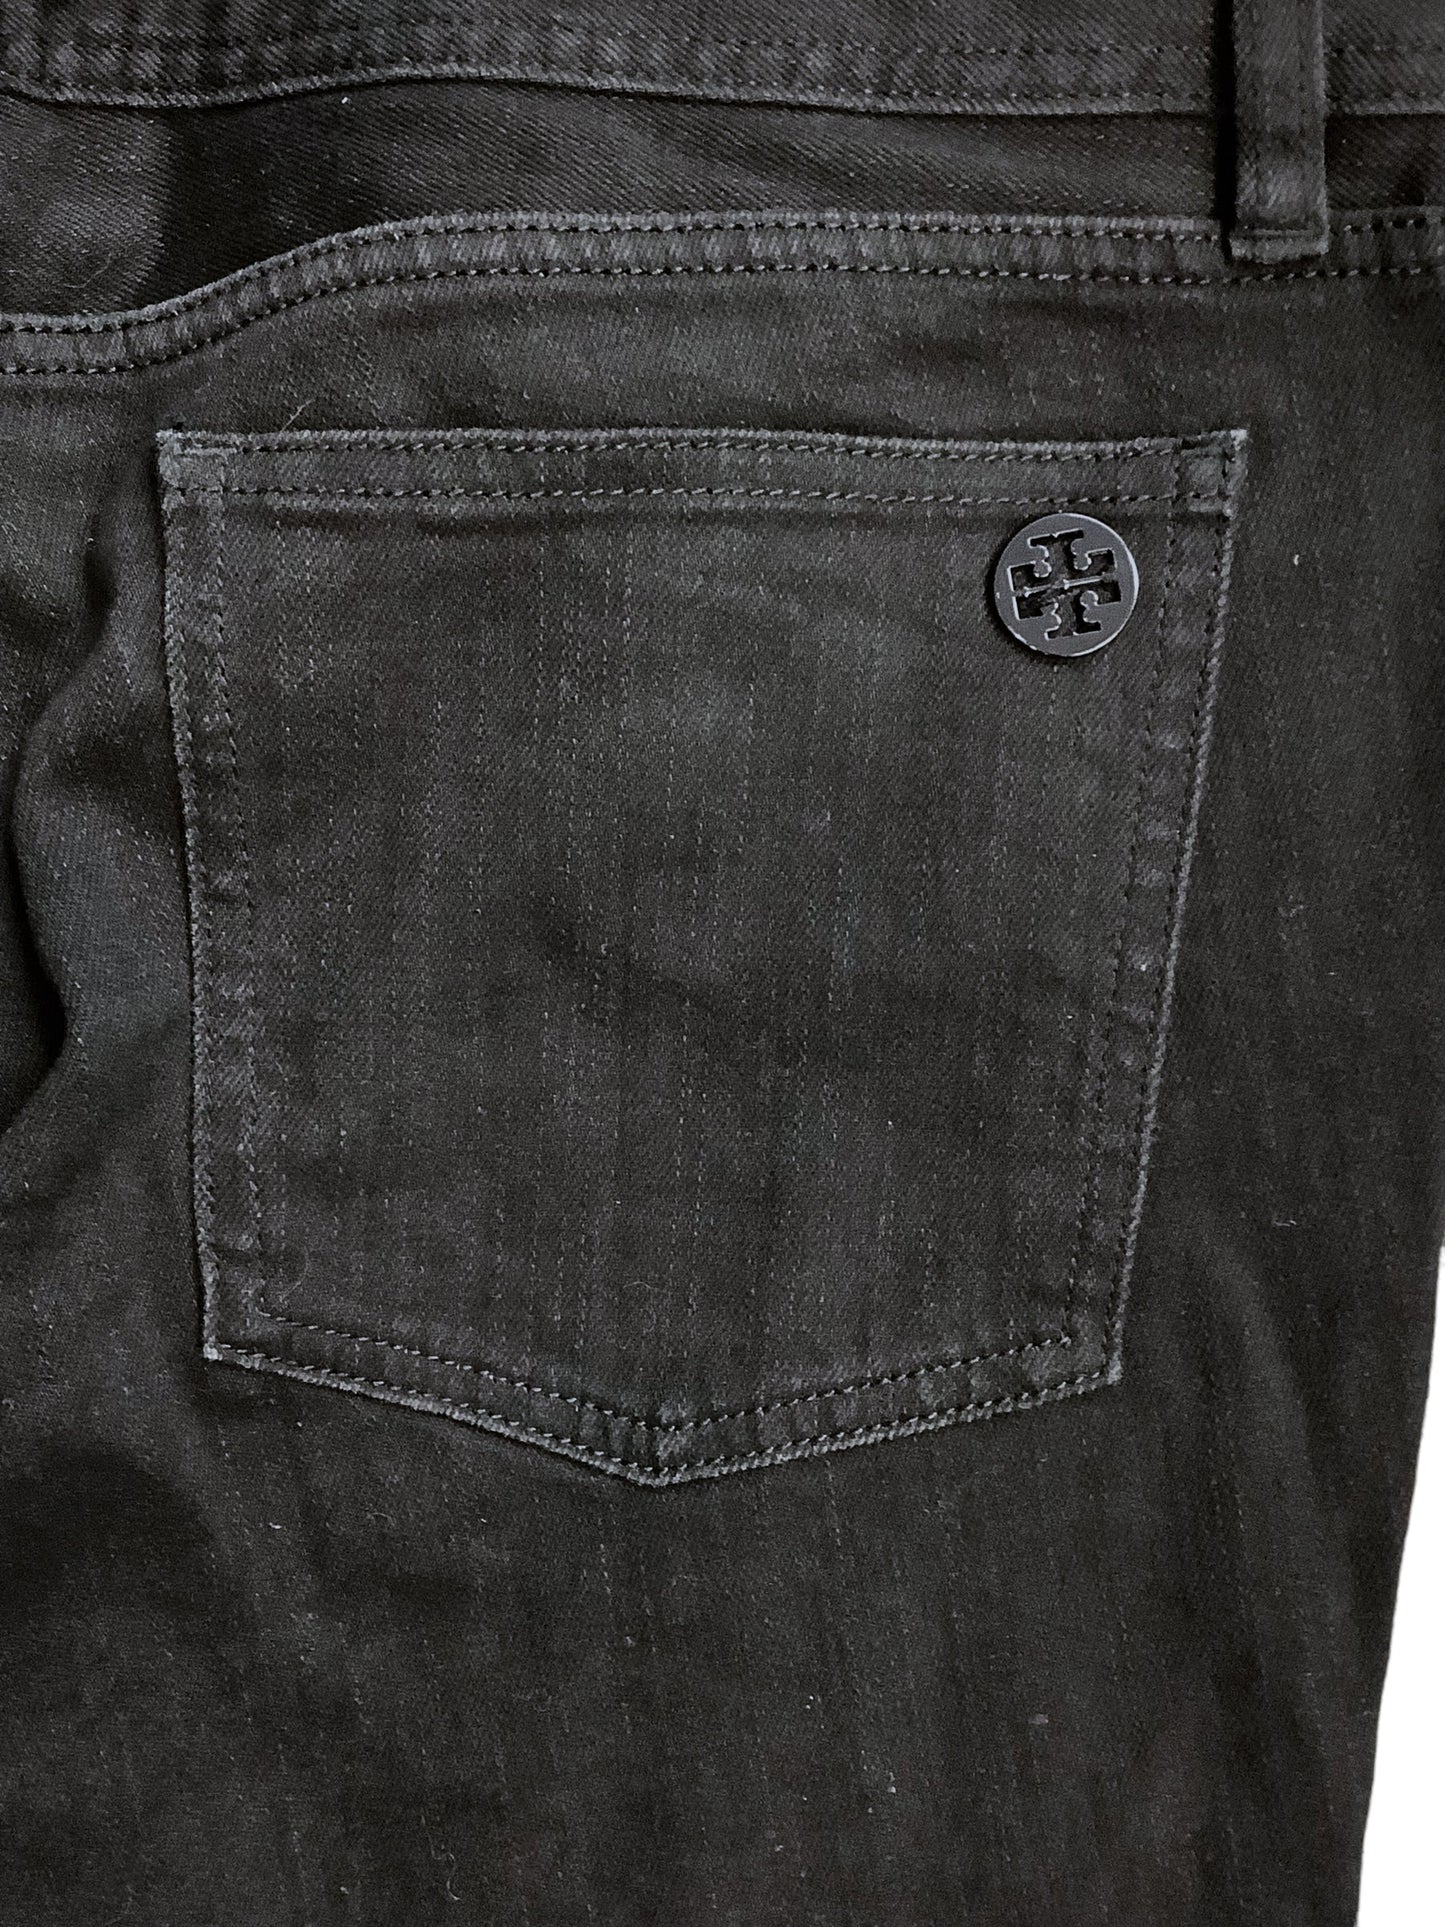 Jeans Straight By Tory Burch  Size: 14/32